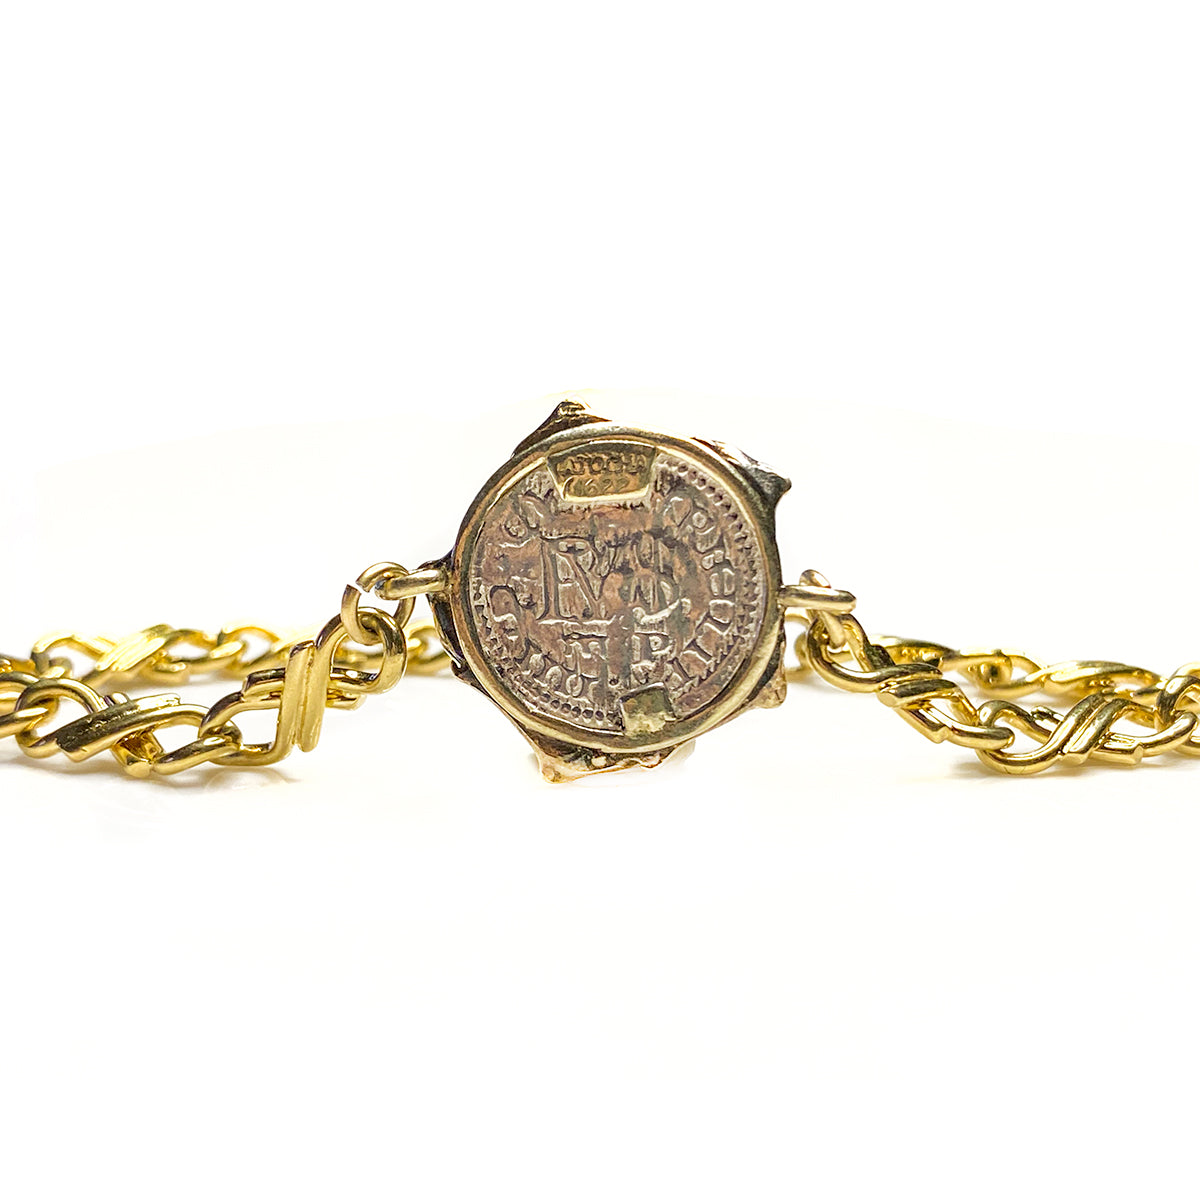 Great Lakes Boutique Gold Plated Atocha Replica Coin Bracelet